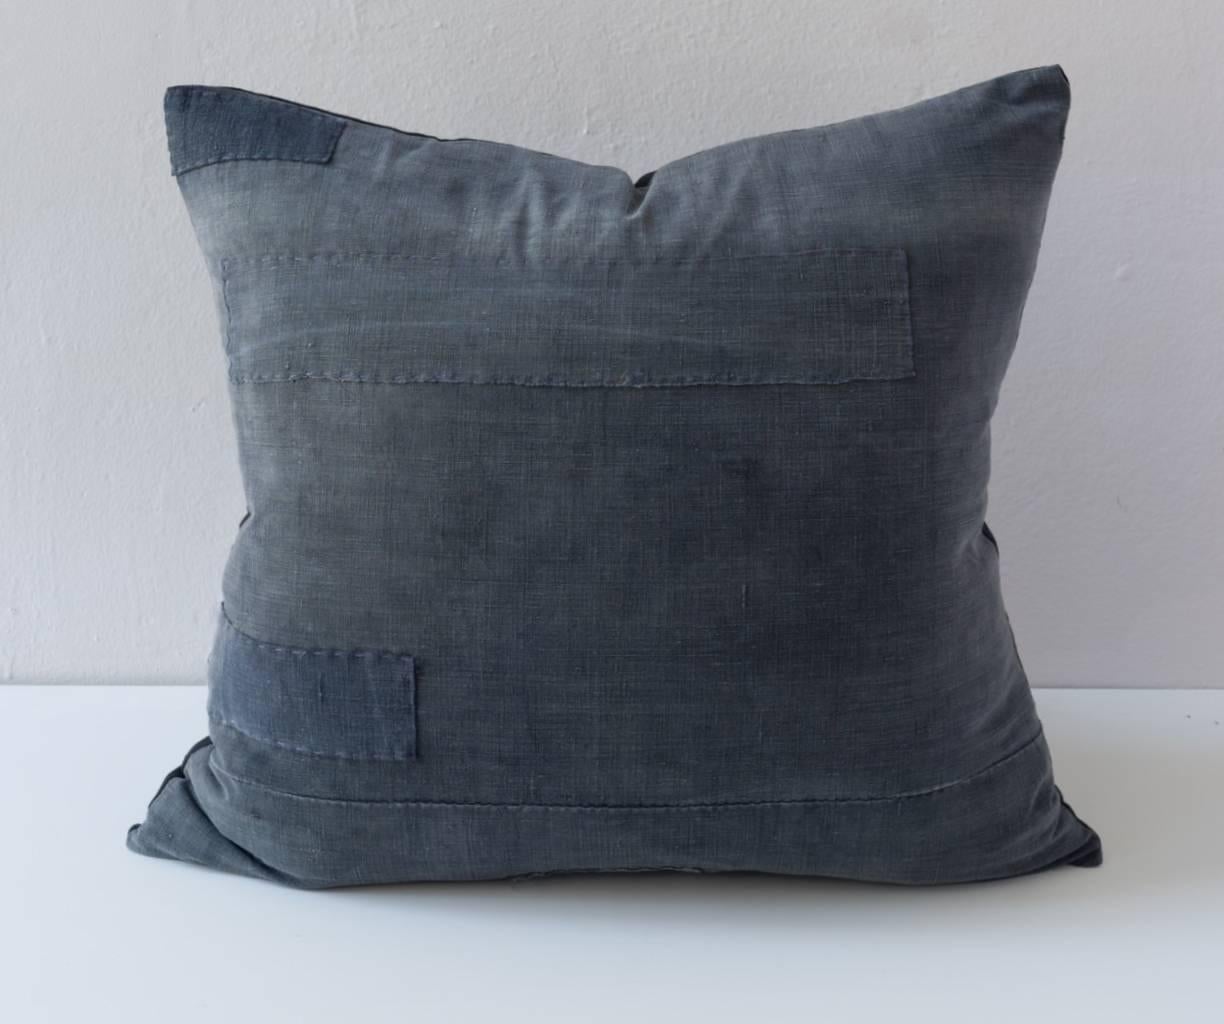 Charming black-grey cushions made from vintage futon covers. Hebei Province, China. 

Linen on reverse--see image
75/25 goose feather and down inserts.
Concealed zipper.
Check our 1stdibs storefront for pillows in coordinating fabrics.